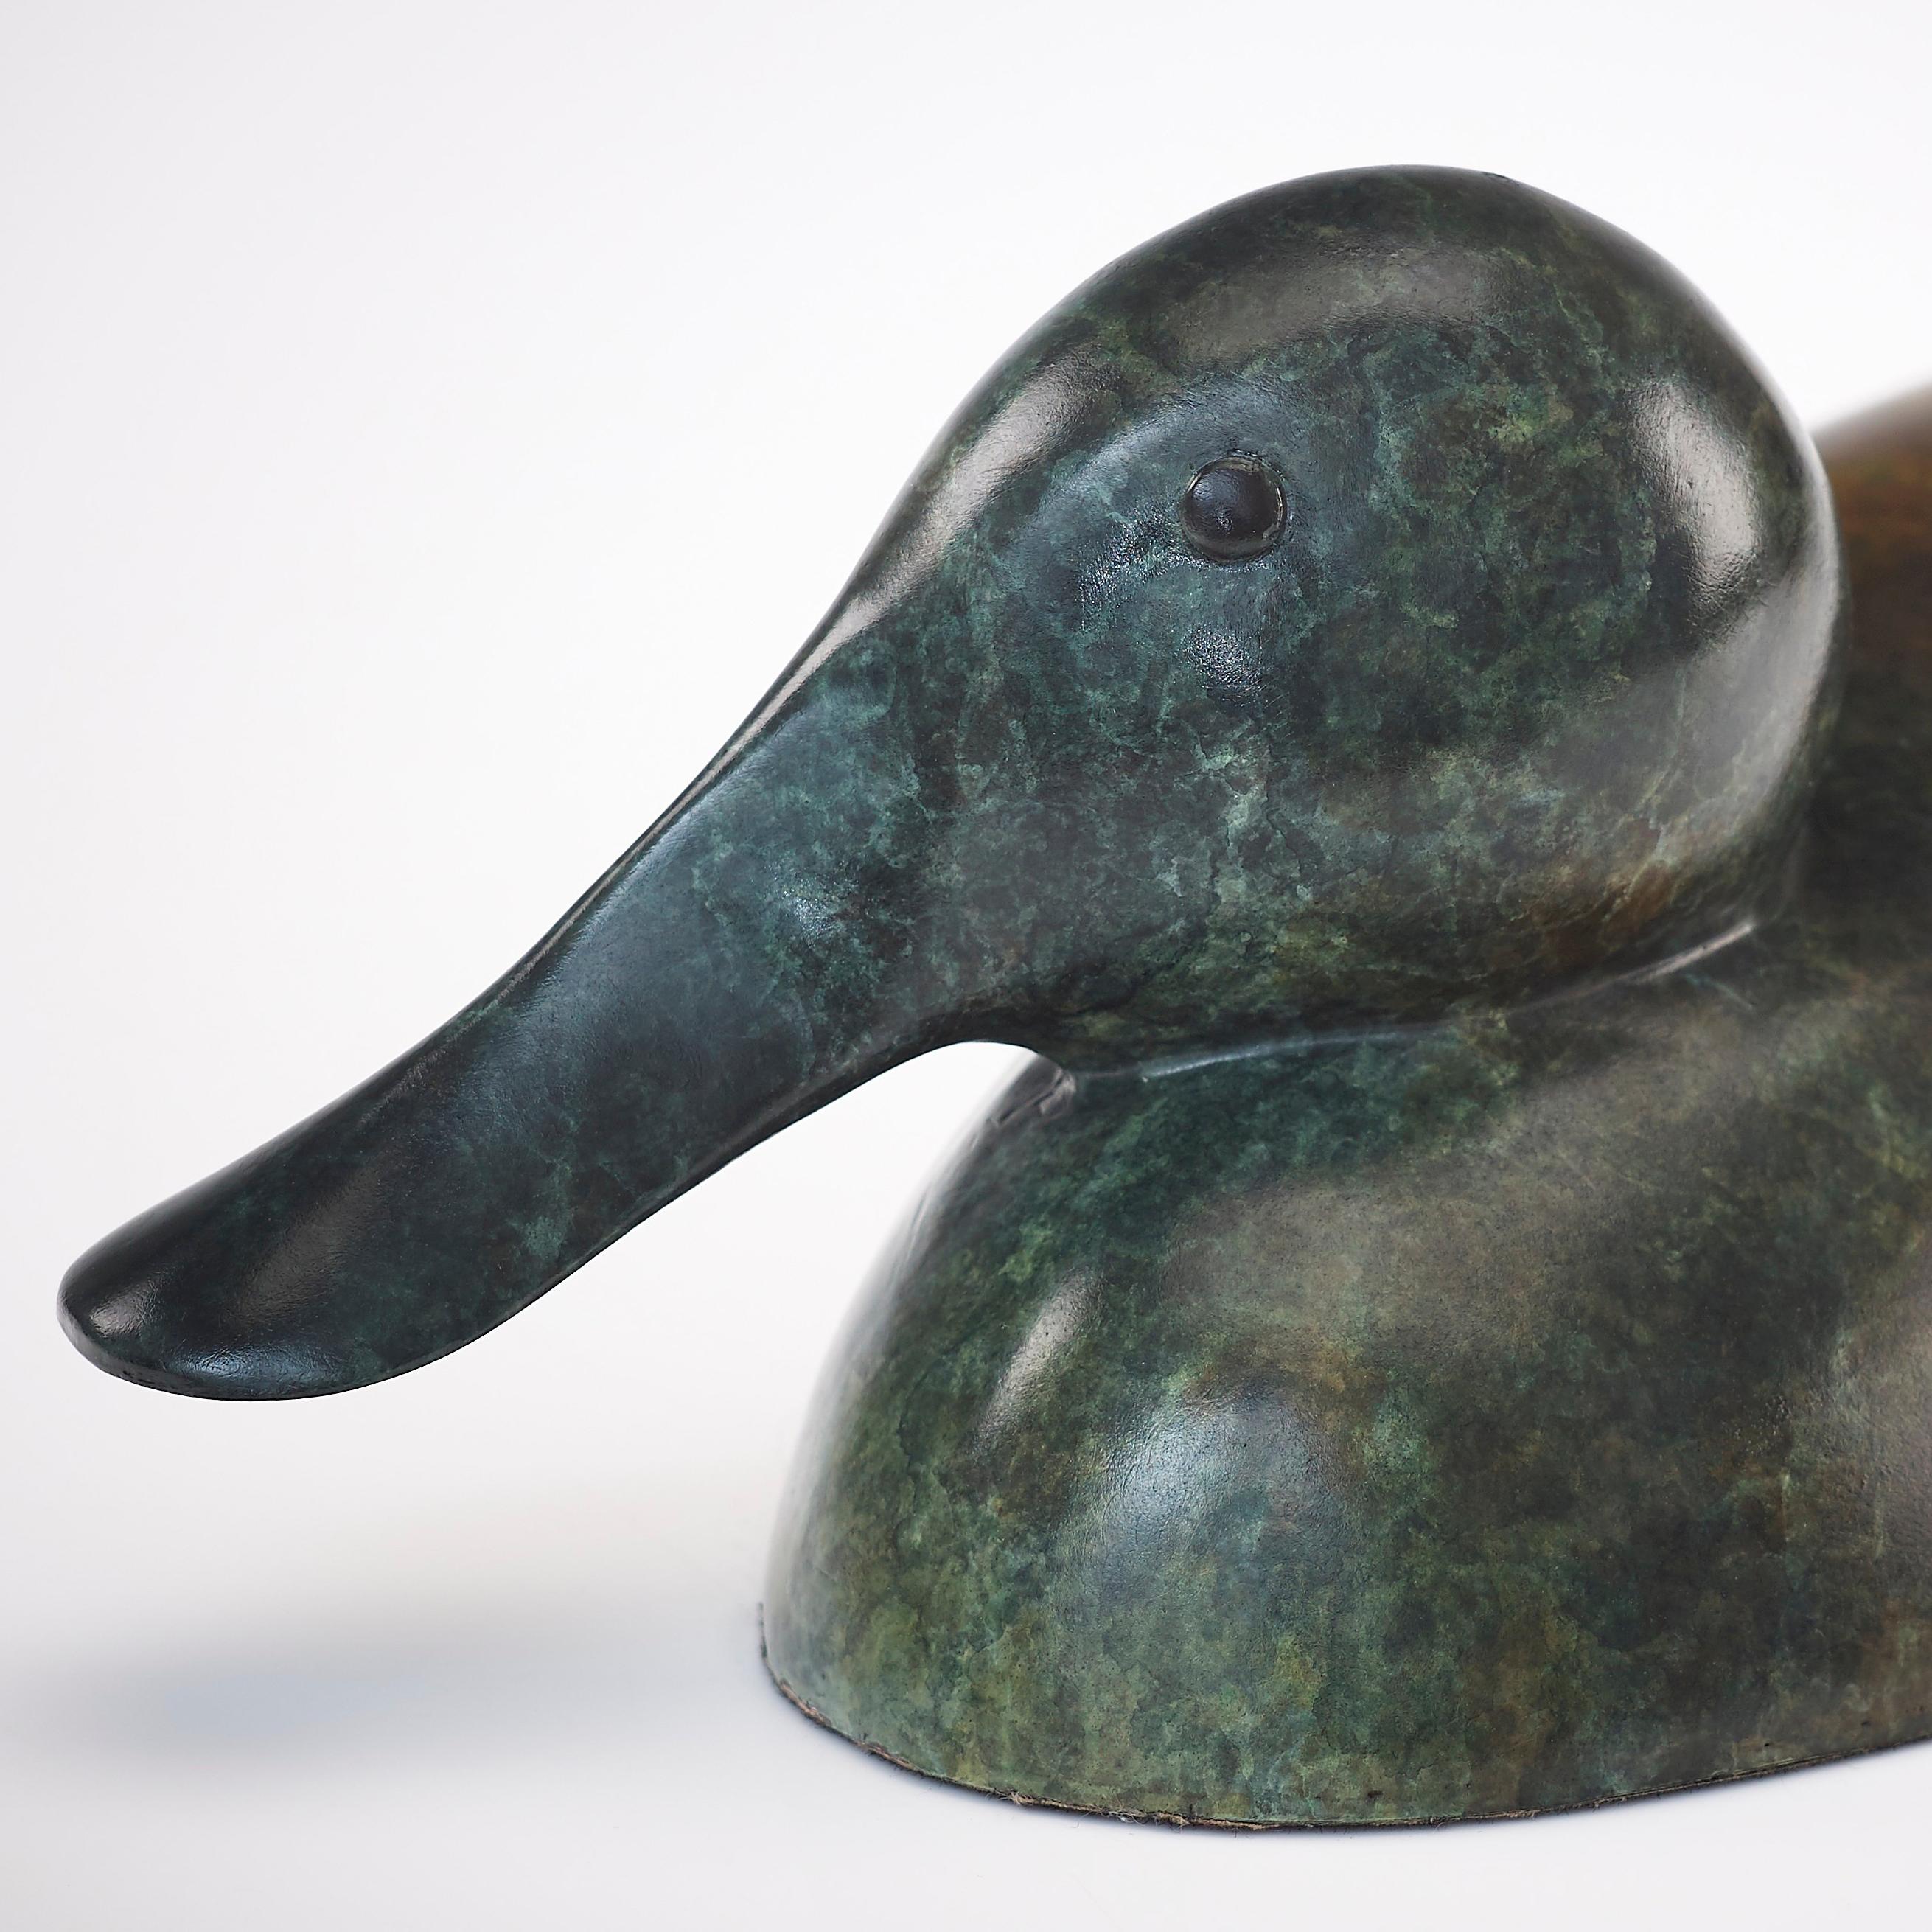 Richard Smith's 'Shovelor Duck' truly conveys his love and knowledge of wildlife. He sculpts with such clarity and simplicity, the type of self-possessed confidence that only results from a true knowledge and time observing the animal.

Richard